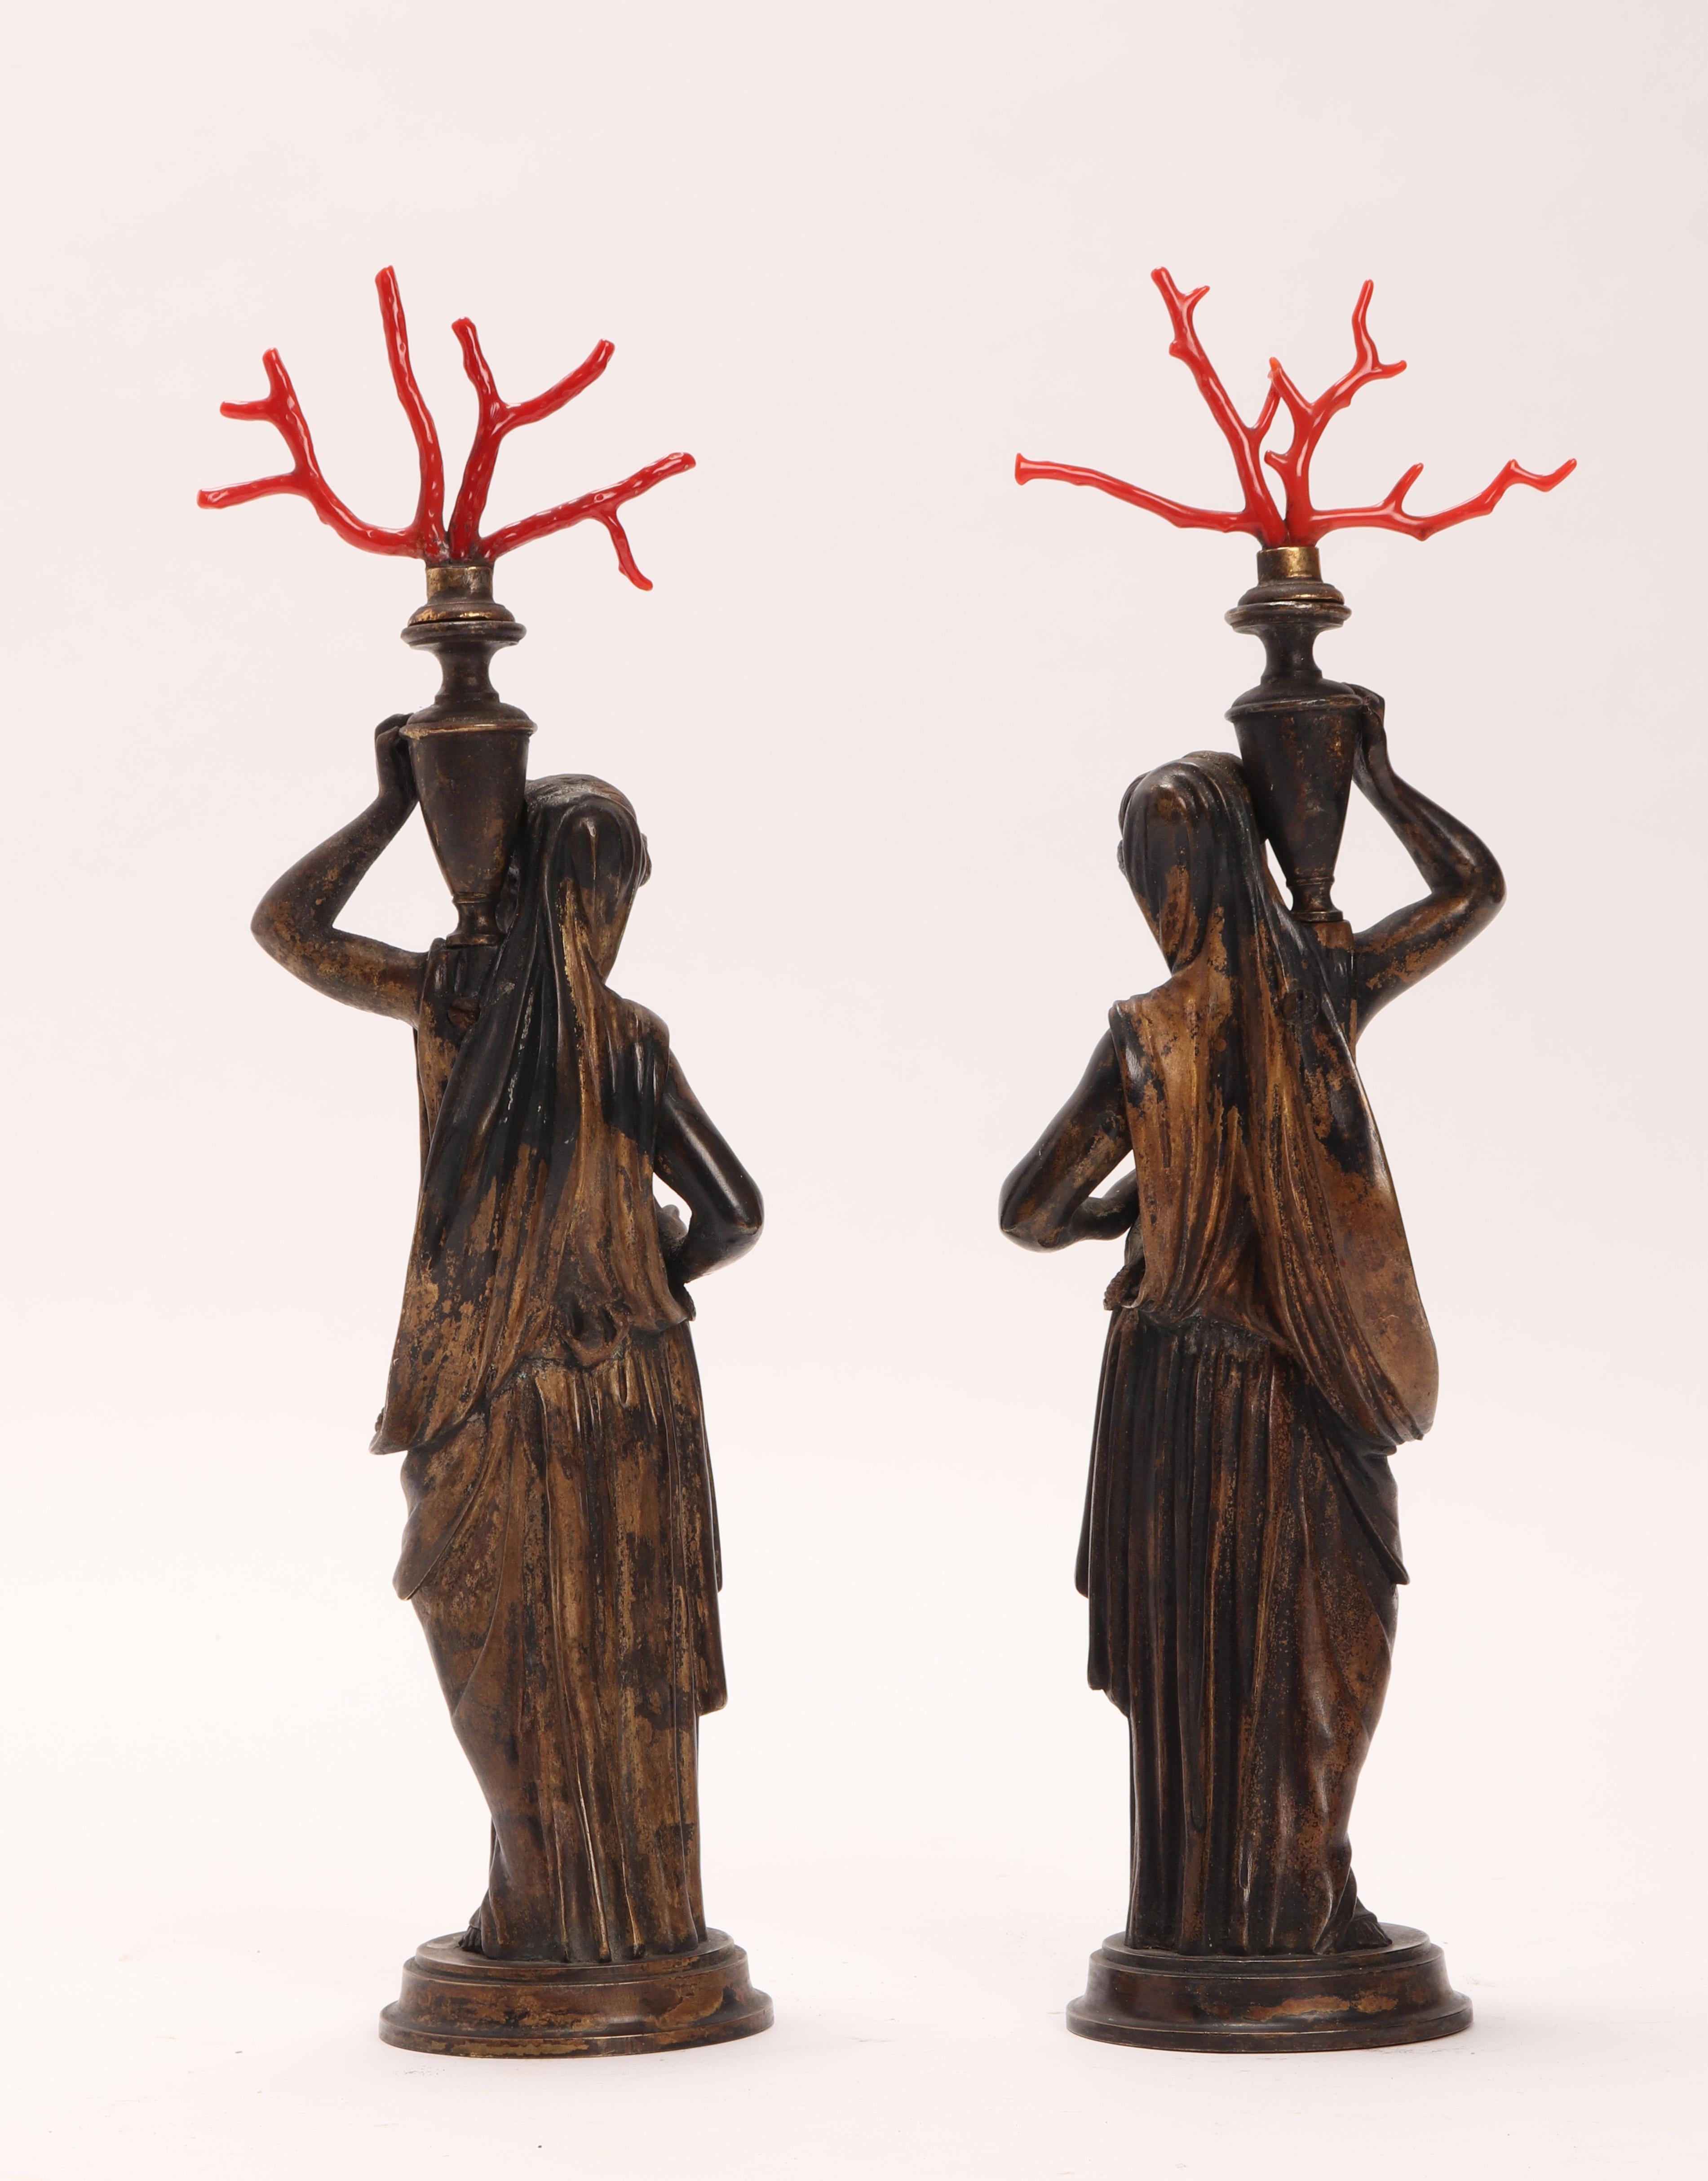 A pair of neoclassical bronze sculptures depicting a woman holding a vase with red Mediterranean coral branches on her shoulder. Italy 1850 ca.